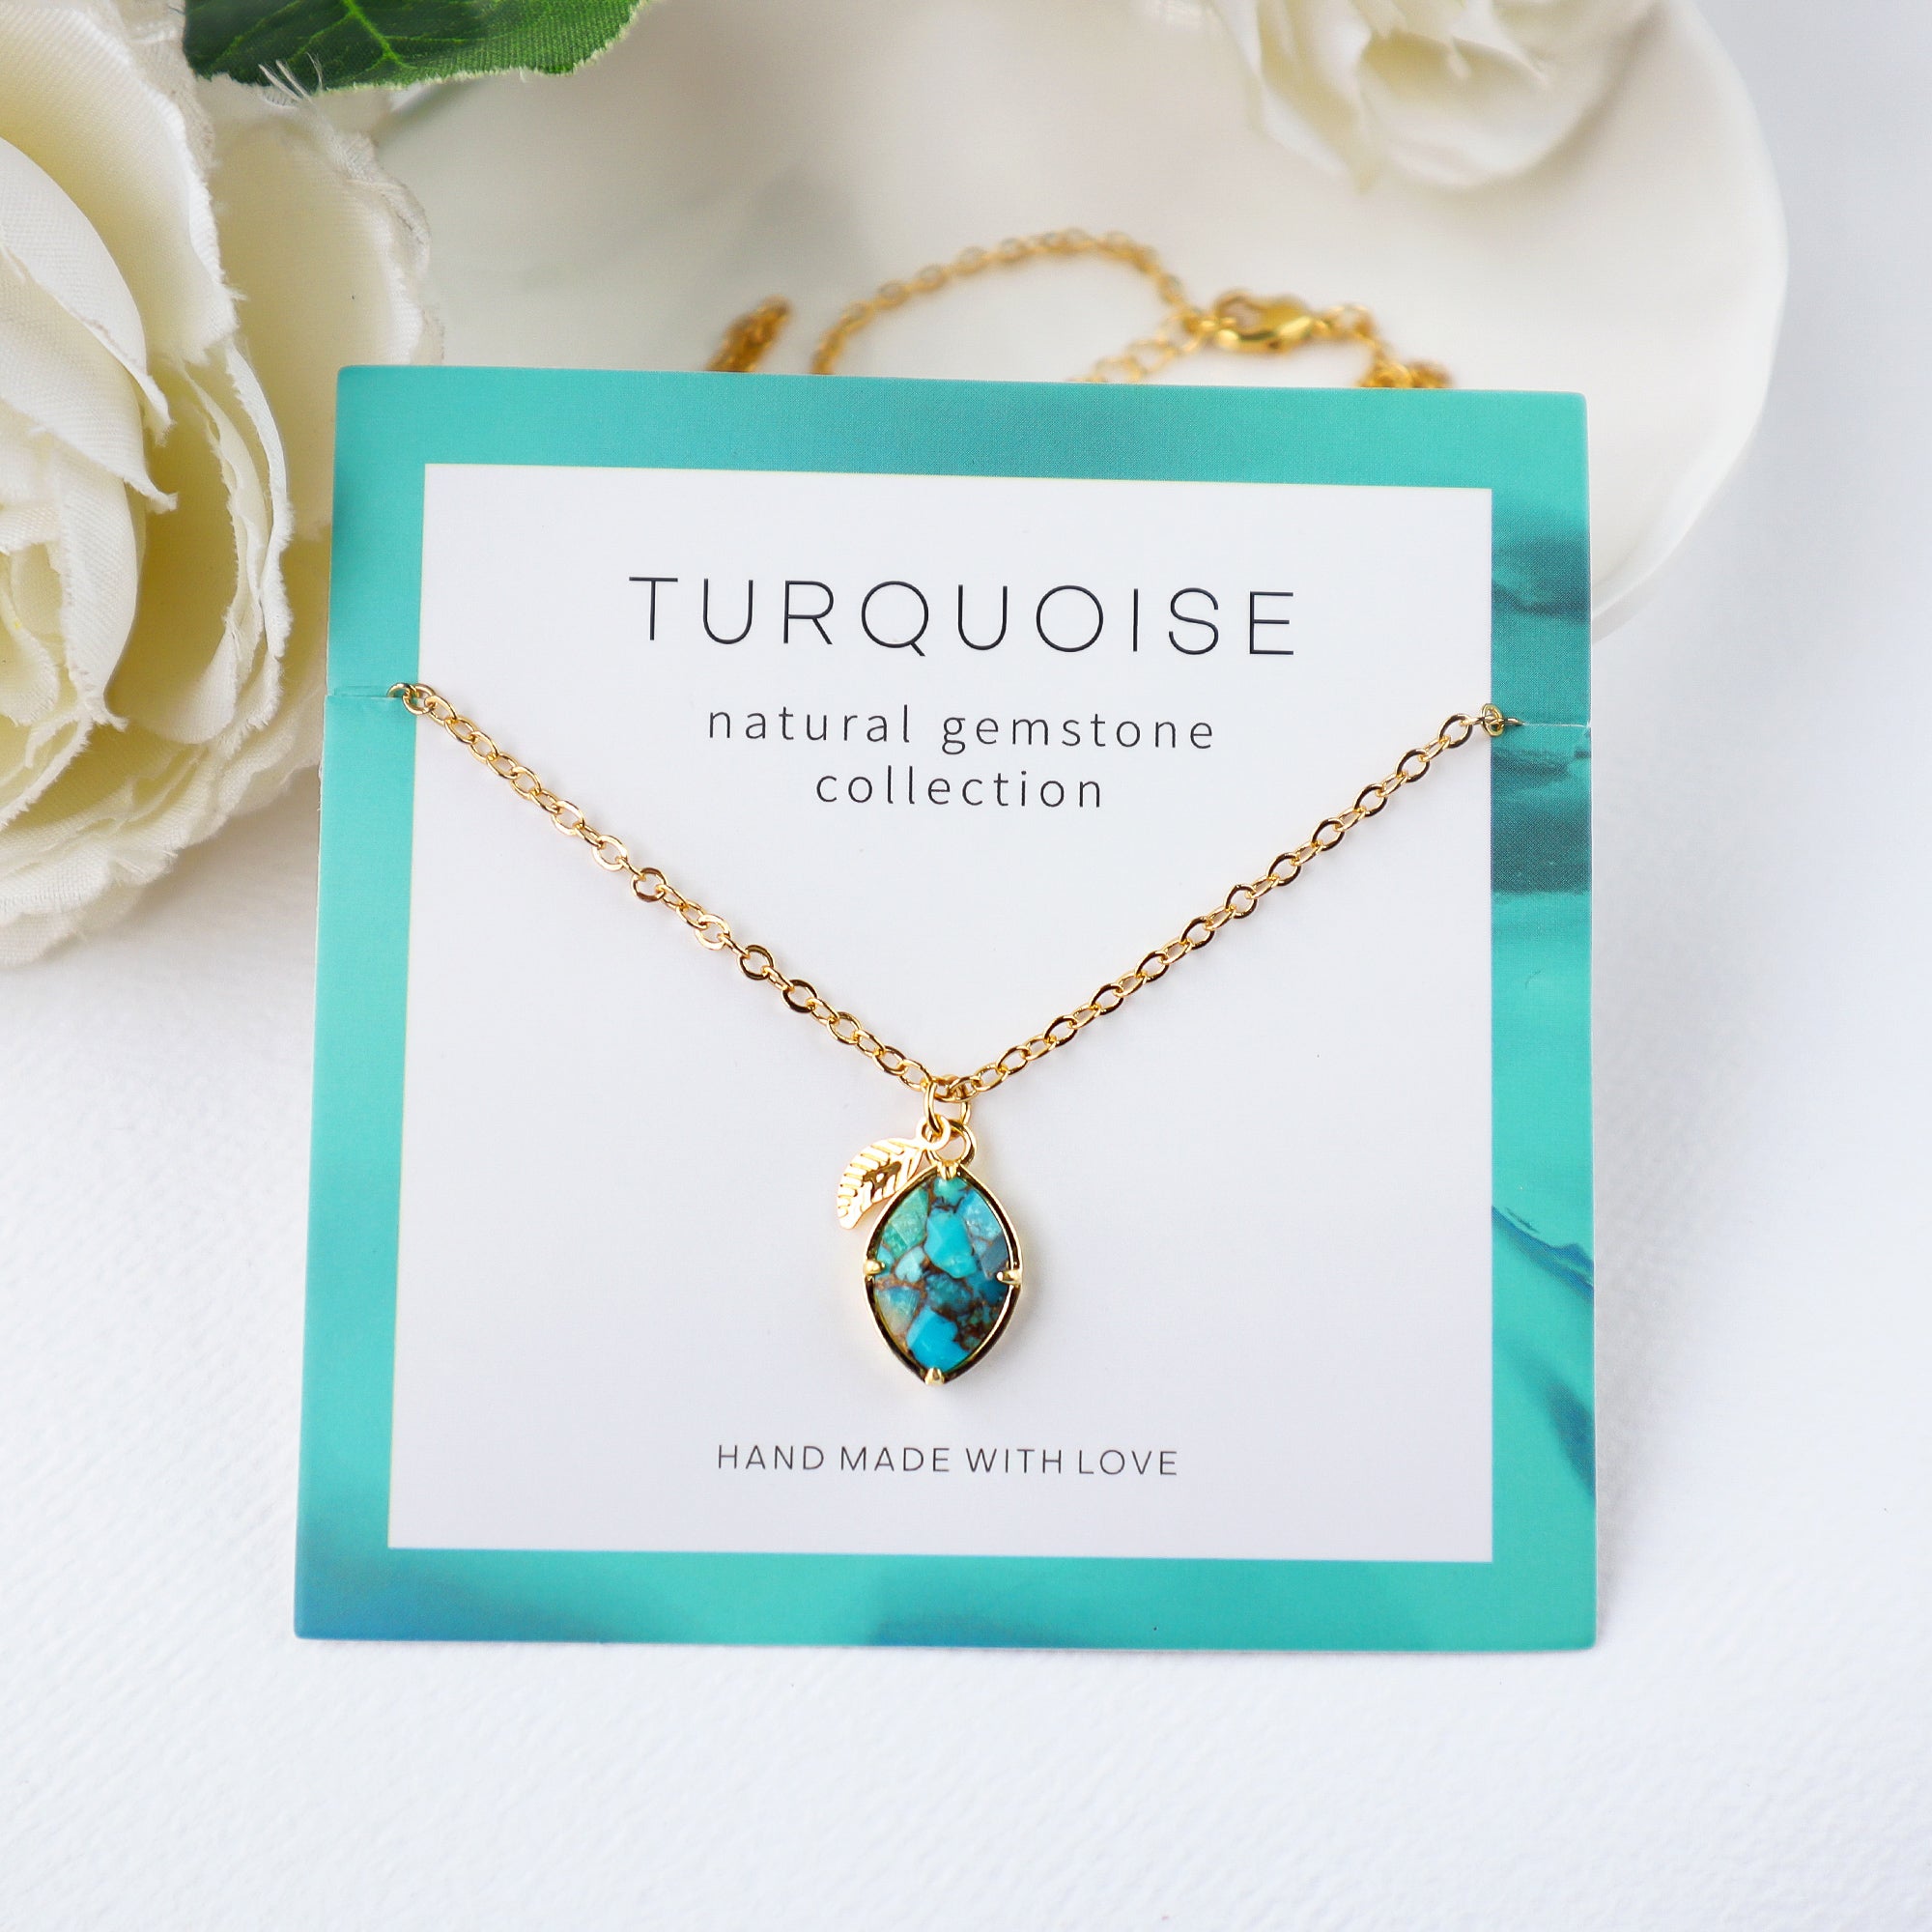 16" Gold Plated Leaf & Marquise Rainbow Gemstone Necklace, Birthstone, Faceted Amazonite Aquamarine Peridot Turquoise Necklace, Healing Crystal Jewelry BT015 Copper Turquoise necklace